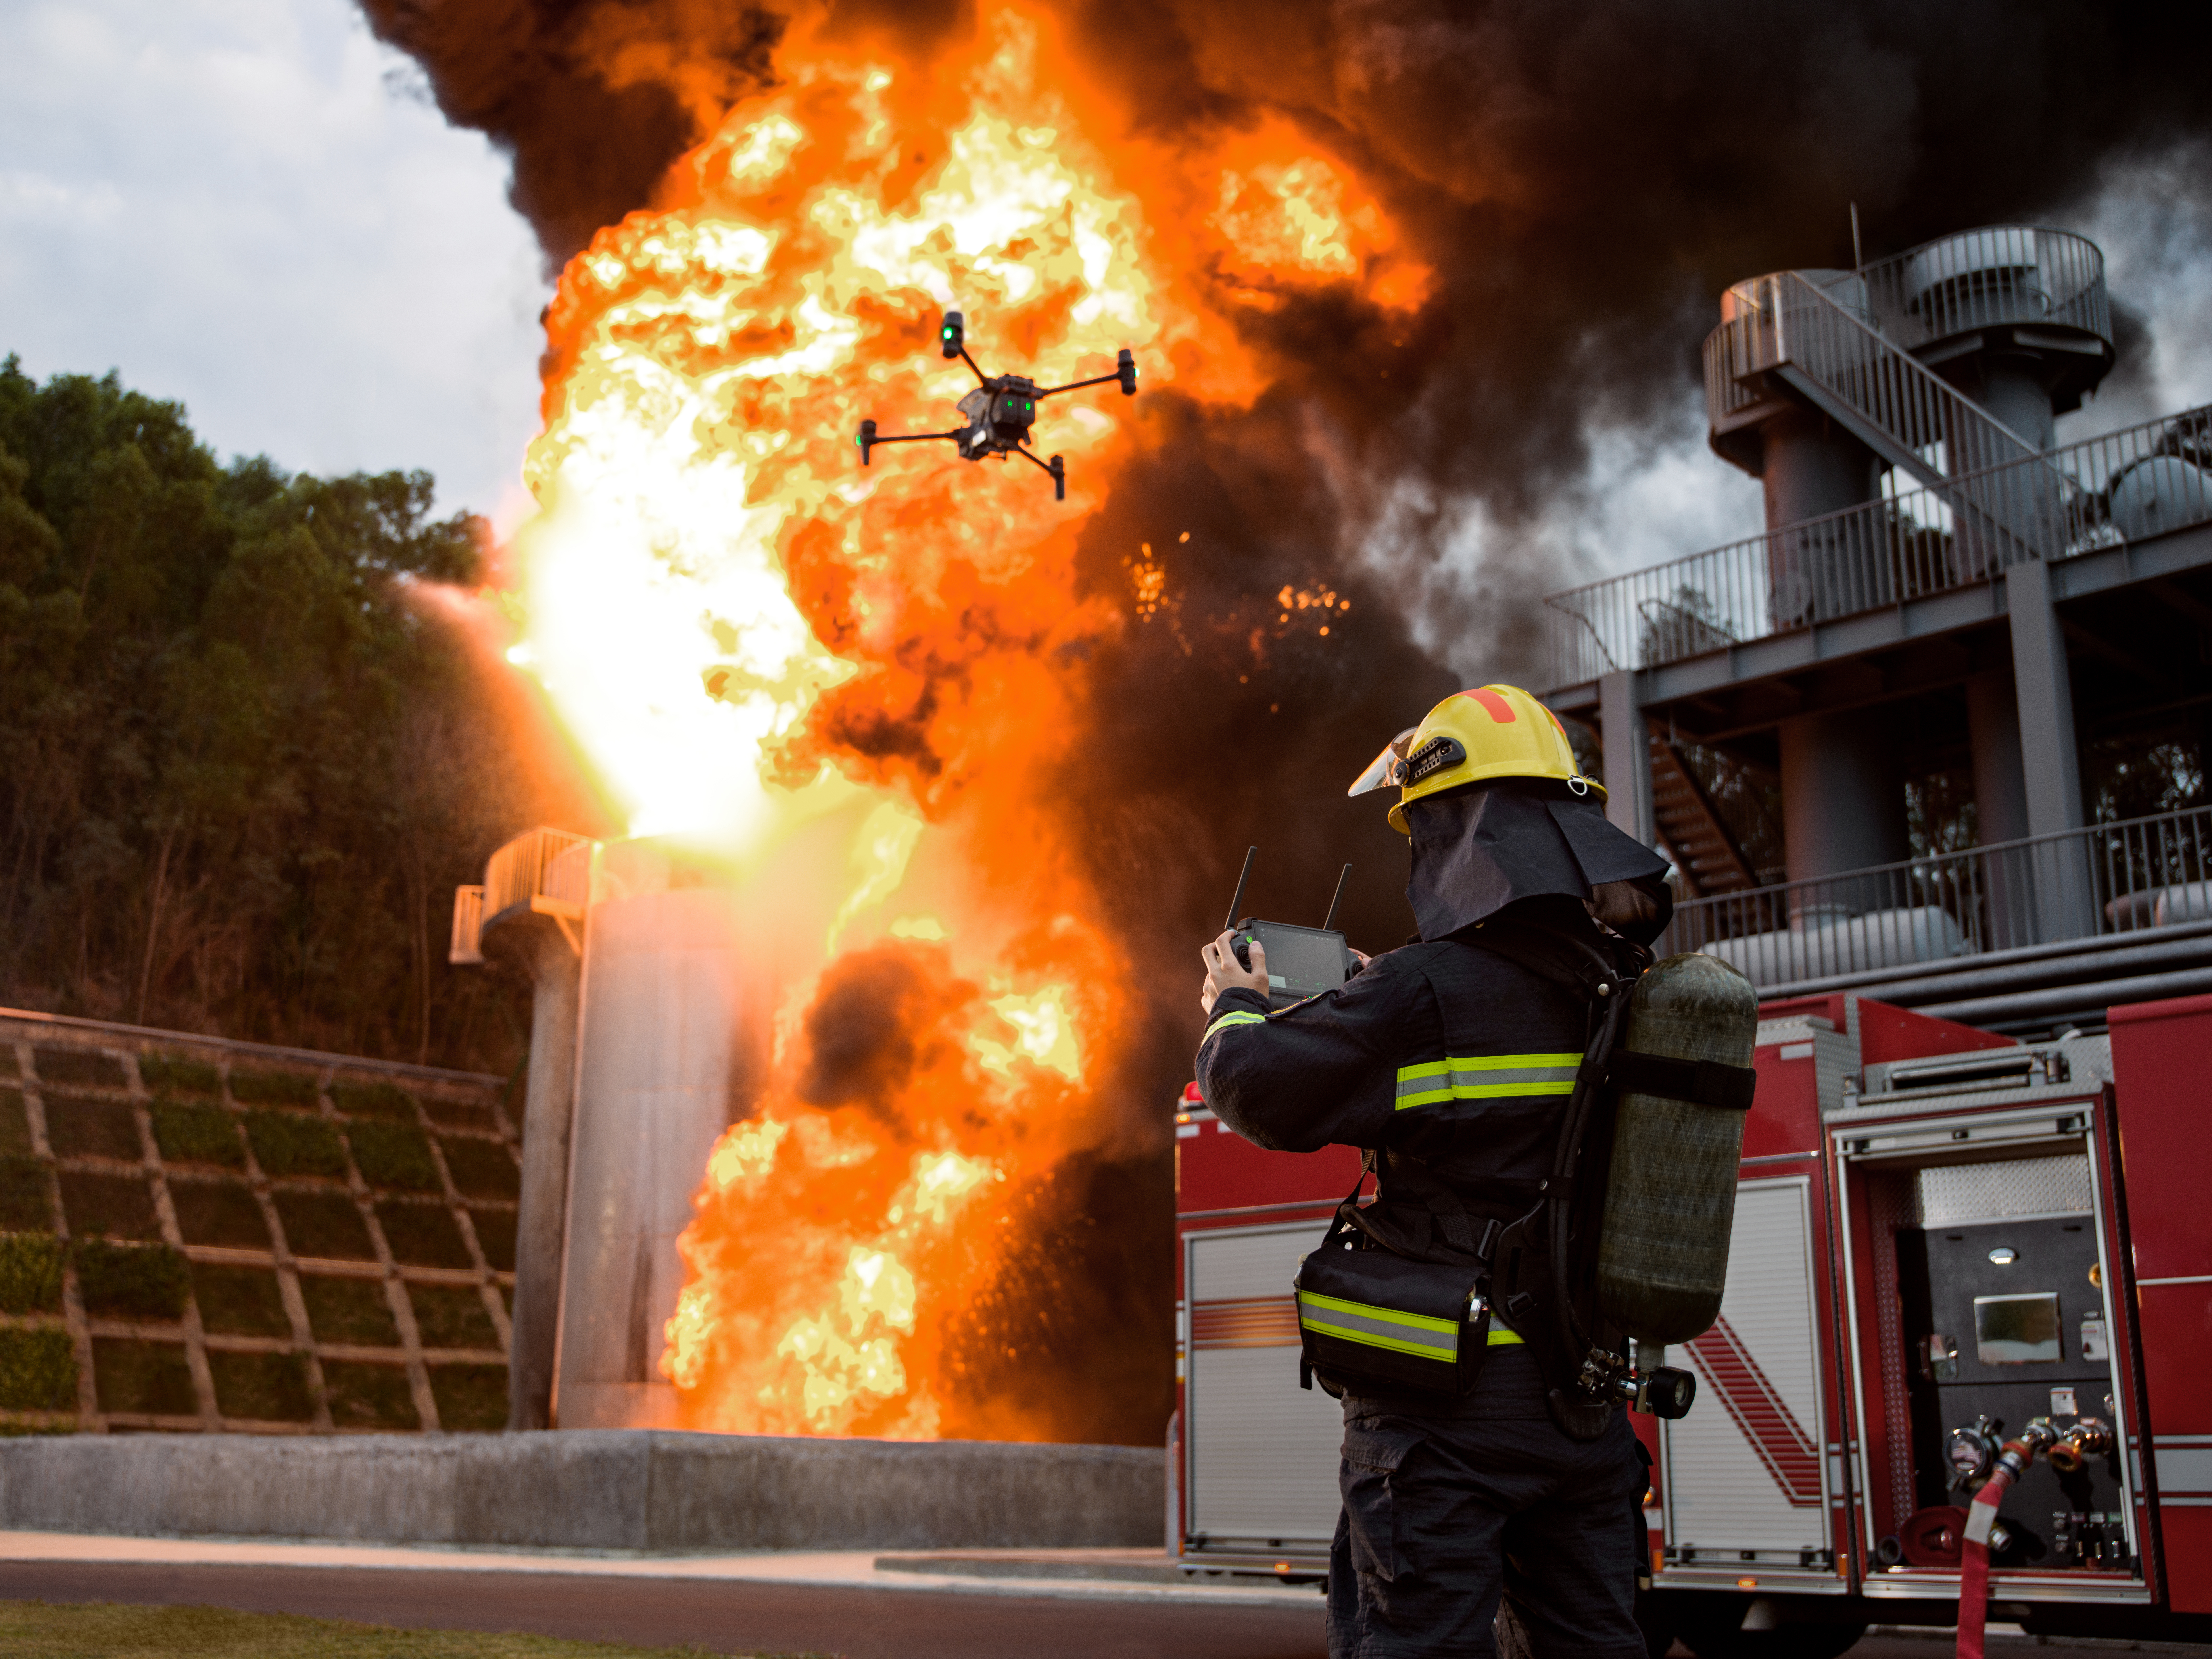 Drone flying through fire next to a firetruck